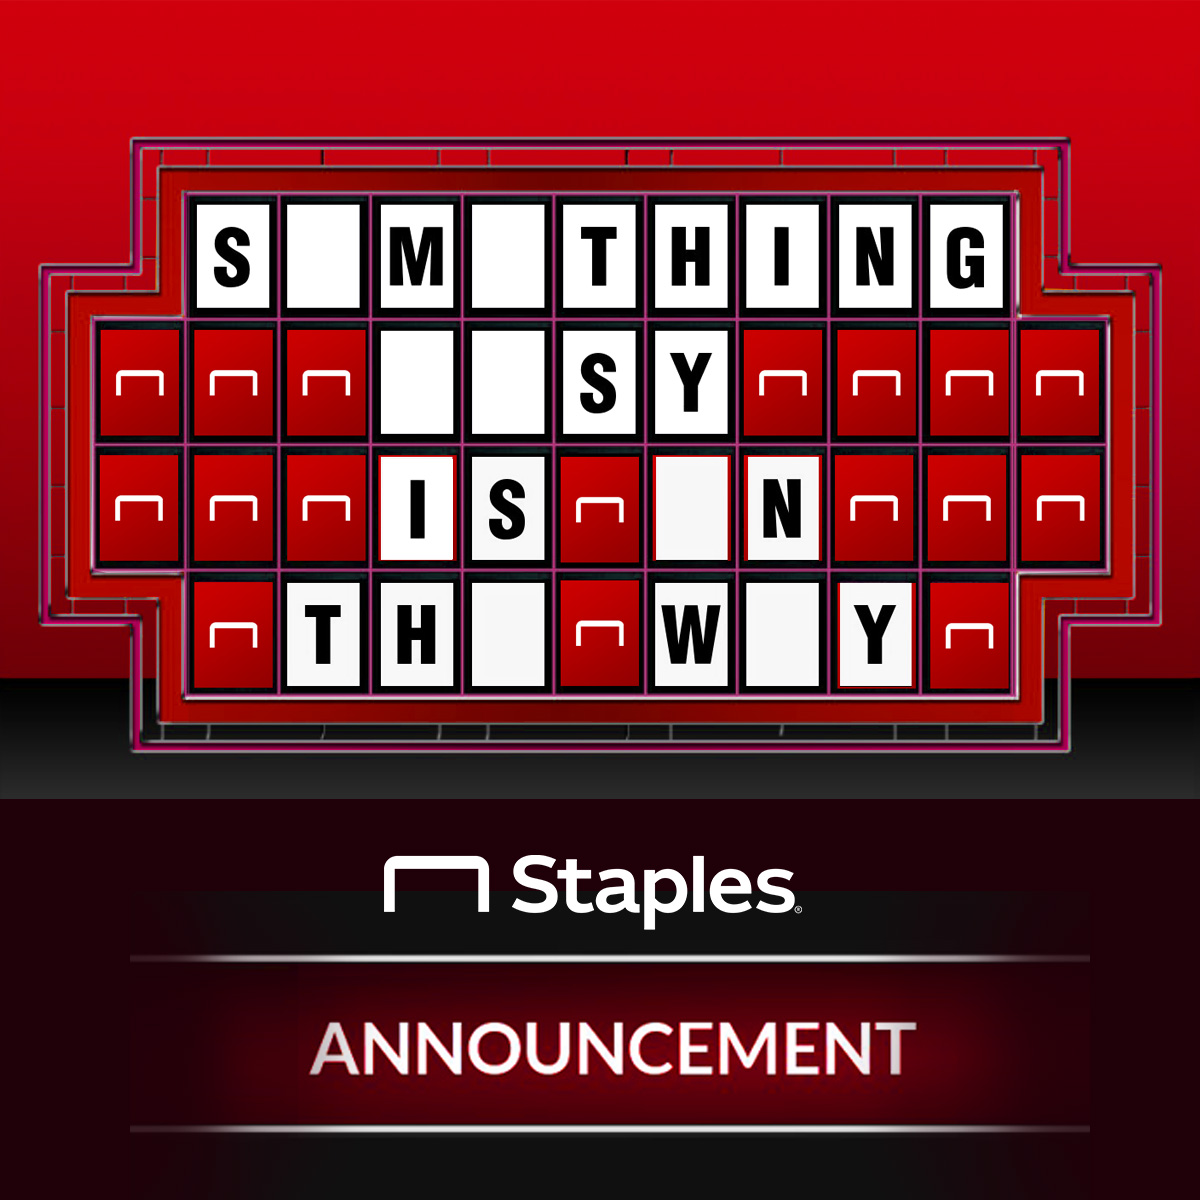 Can you guess what we’re revealing on 2/7? Check back on our feed to find out! HINT: It’s as ✨easy✨ as this puzzle.